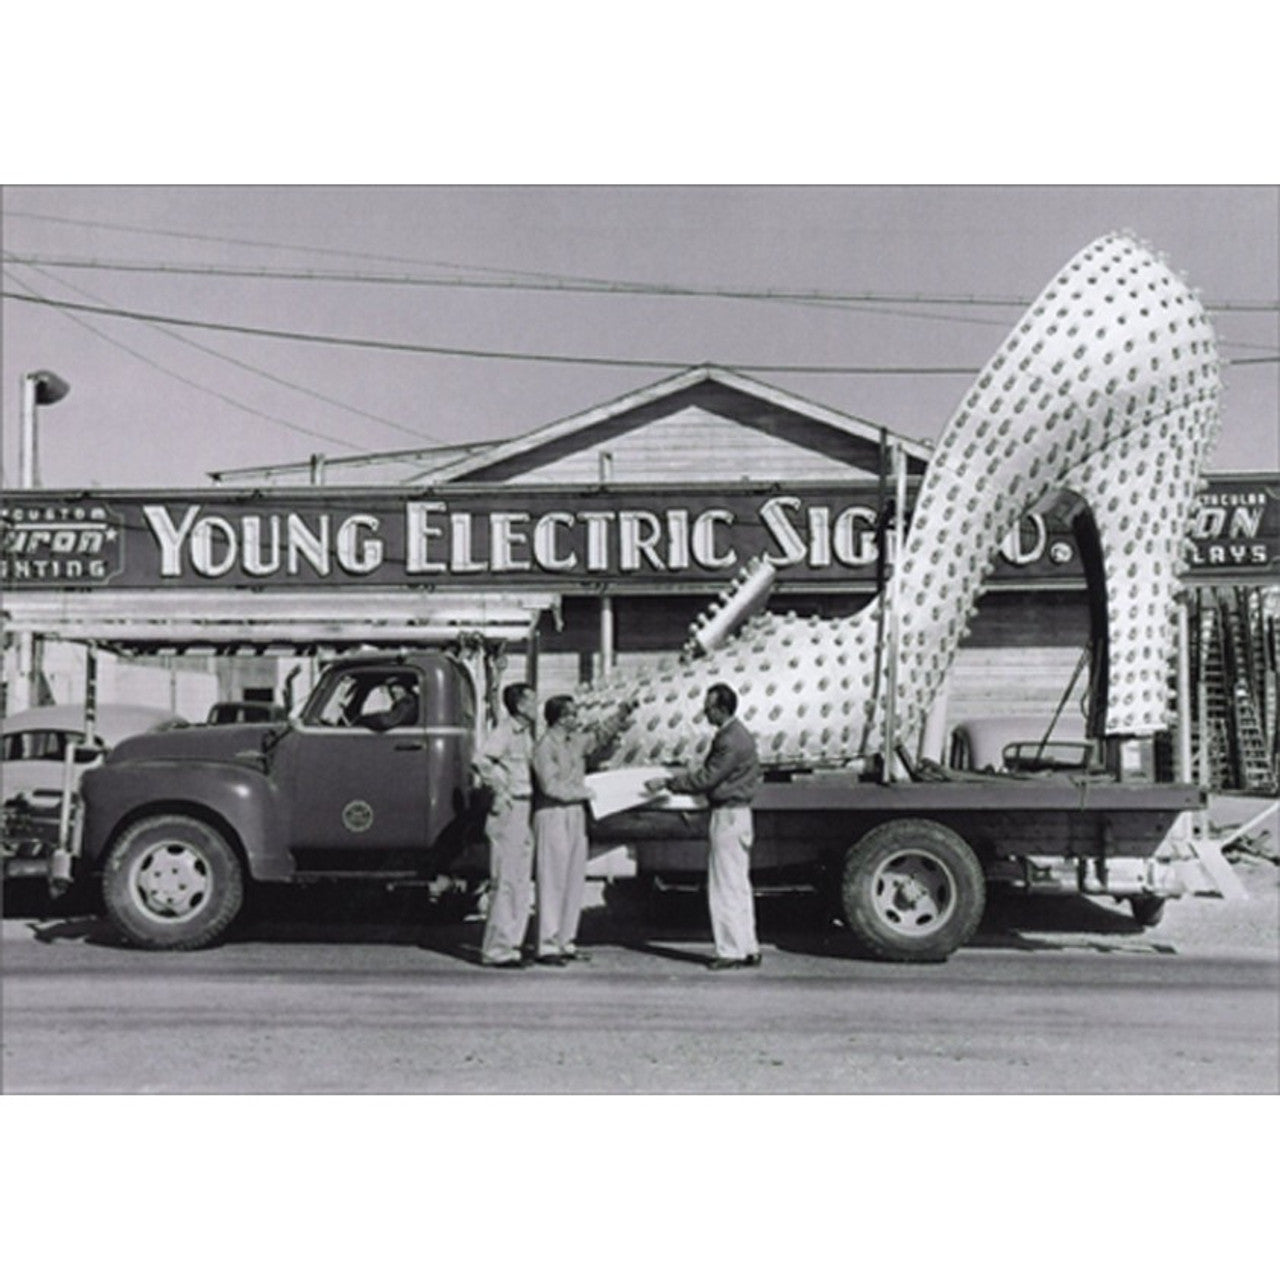 Thank You/ Appreciation Greeting Card - Silver Shoe on Truck